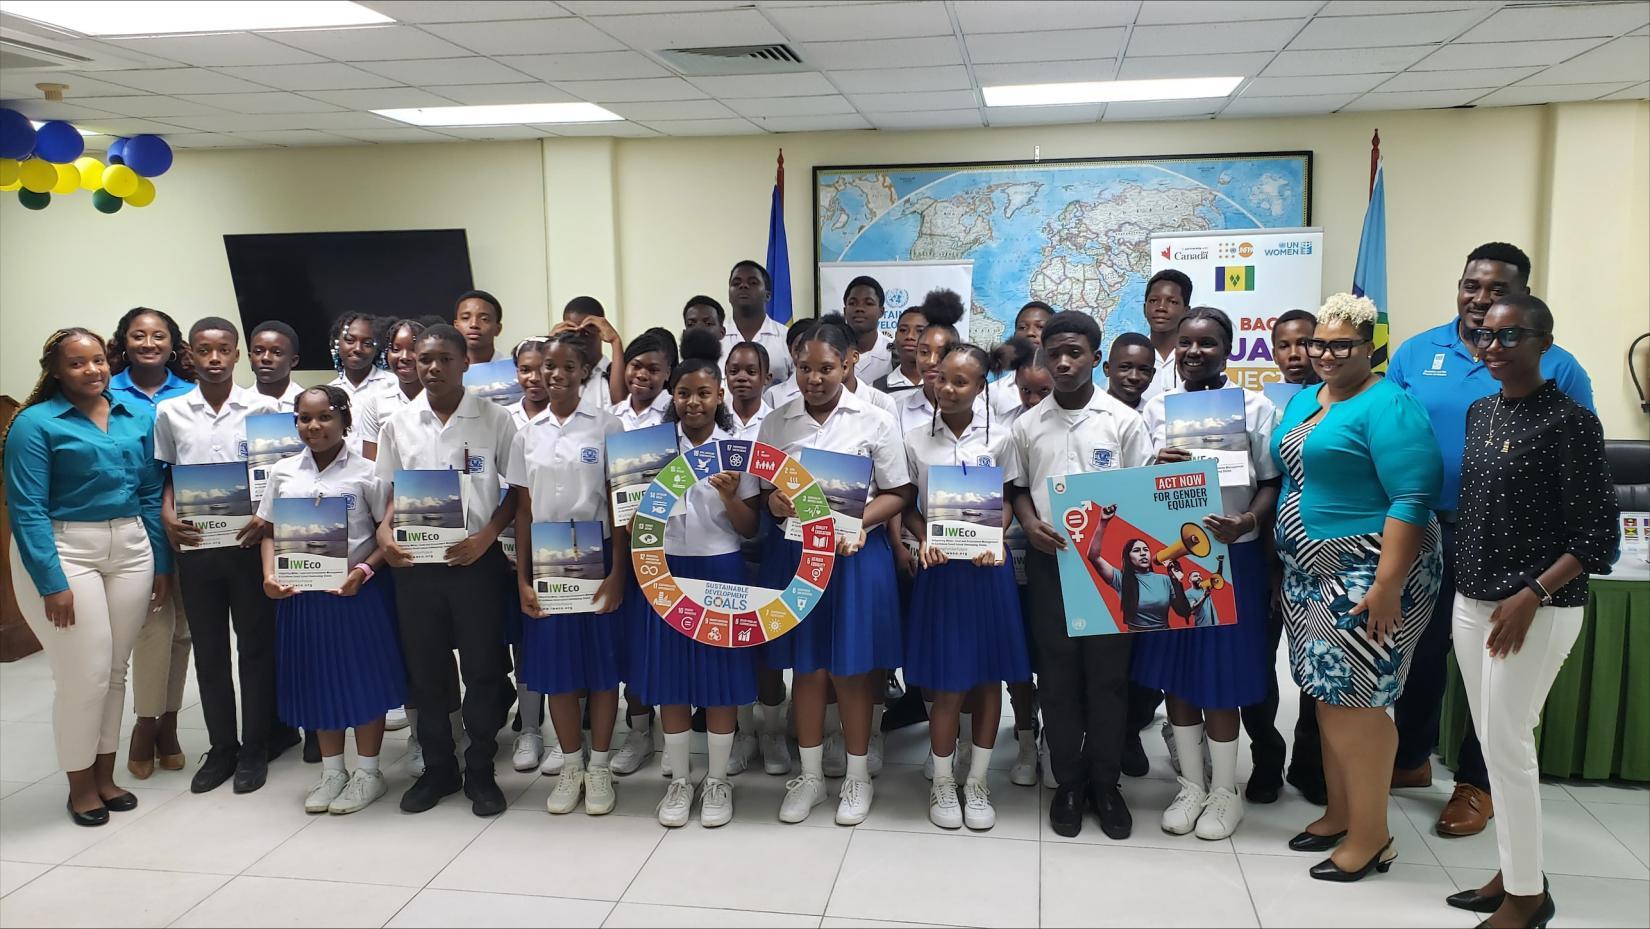 SDG Awareness: Over 35 students from the Adelphi Secondary School were educated about the UN and its support for the country's national development priorities and its vision of achieving the 17 SDGs by 2030, during the School Awareness Session. 